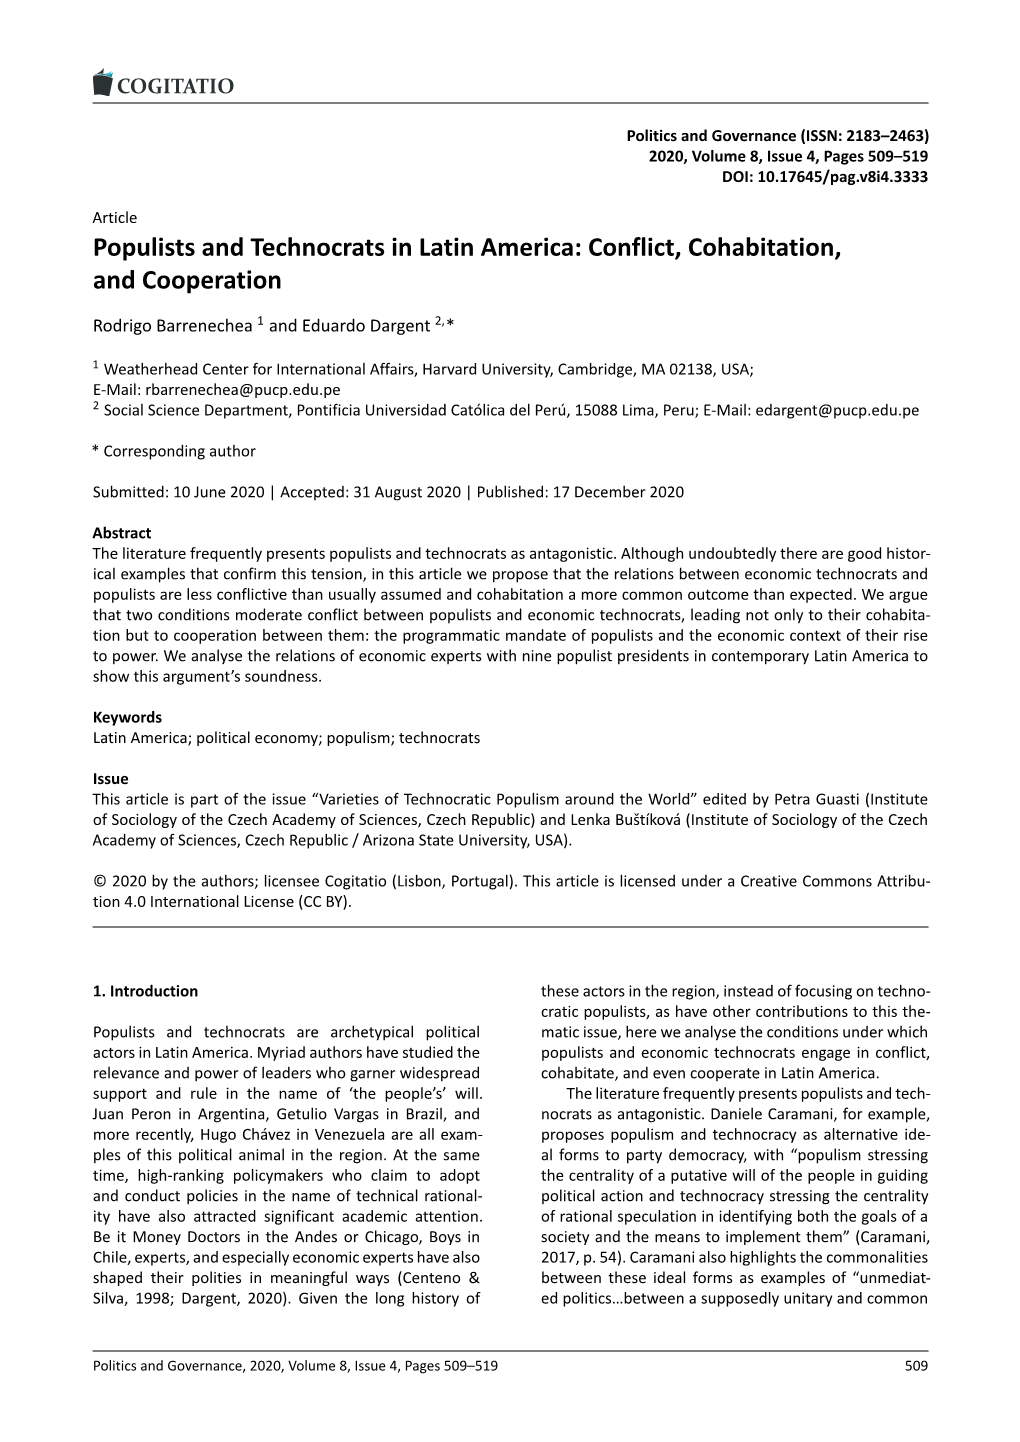 Populists and Technocrats in Latin America: Conflict, Cohabitation, and Cooperation